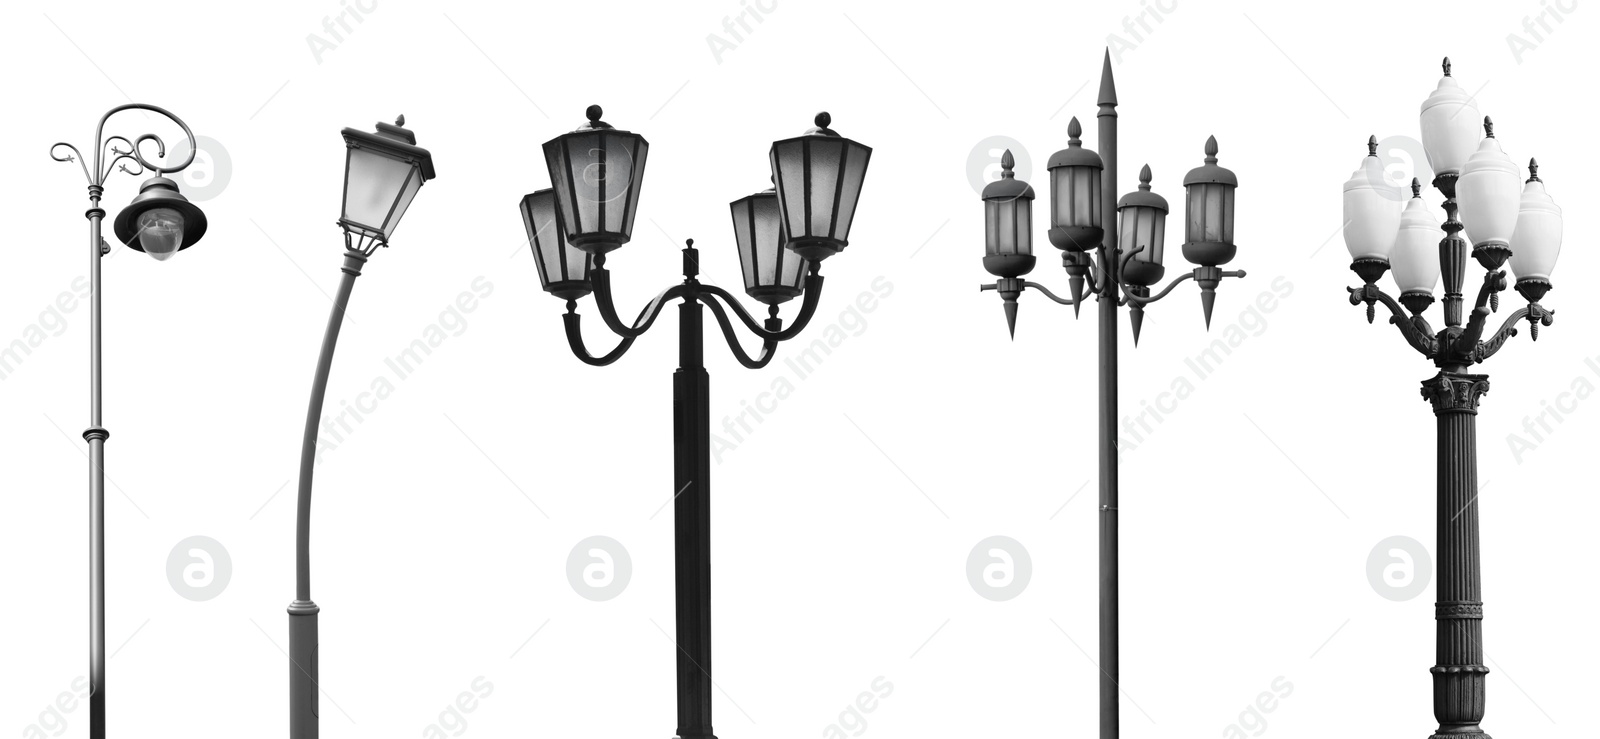 Image of Beautiful street lamps in retro style on white background, collage. Banner design